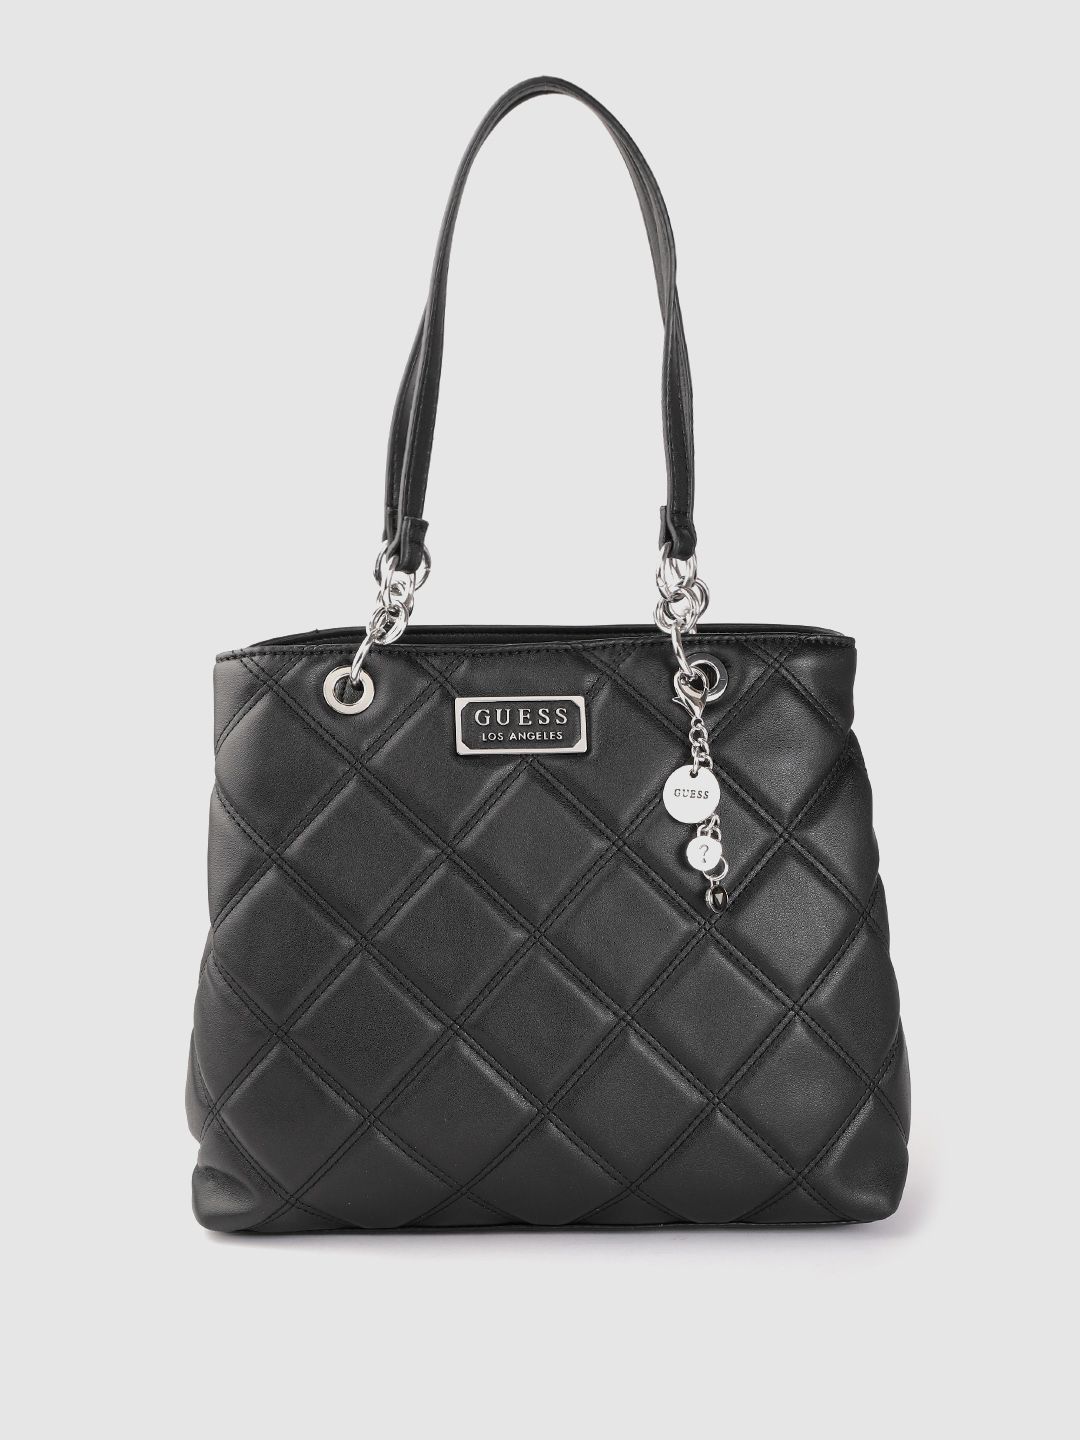 GUESS Black Solid Structured Handheld Bag with Quilted Detail Price in India